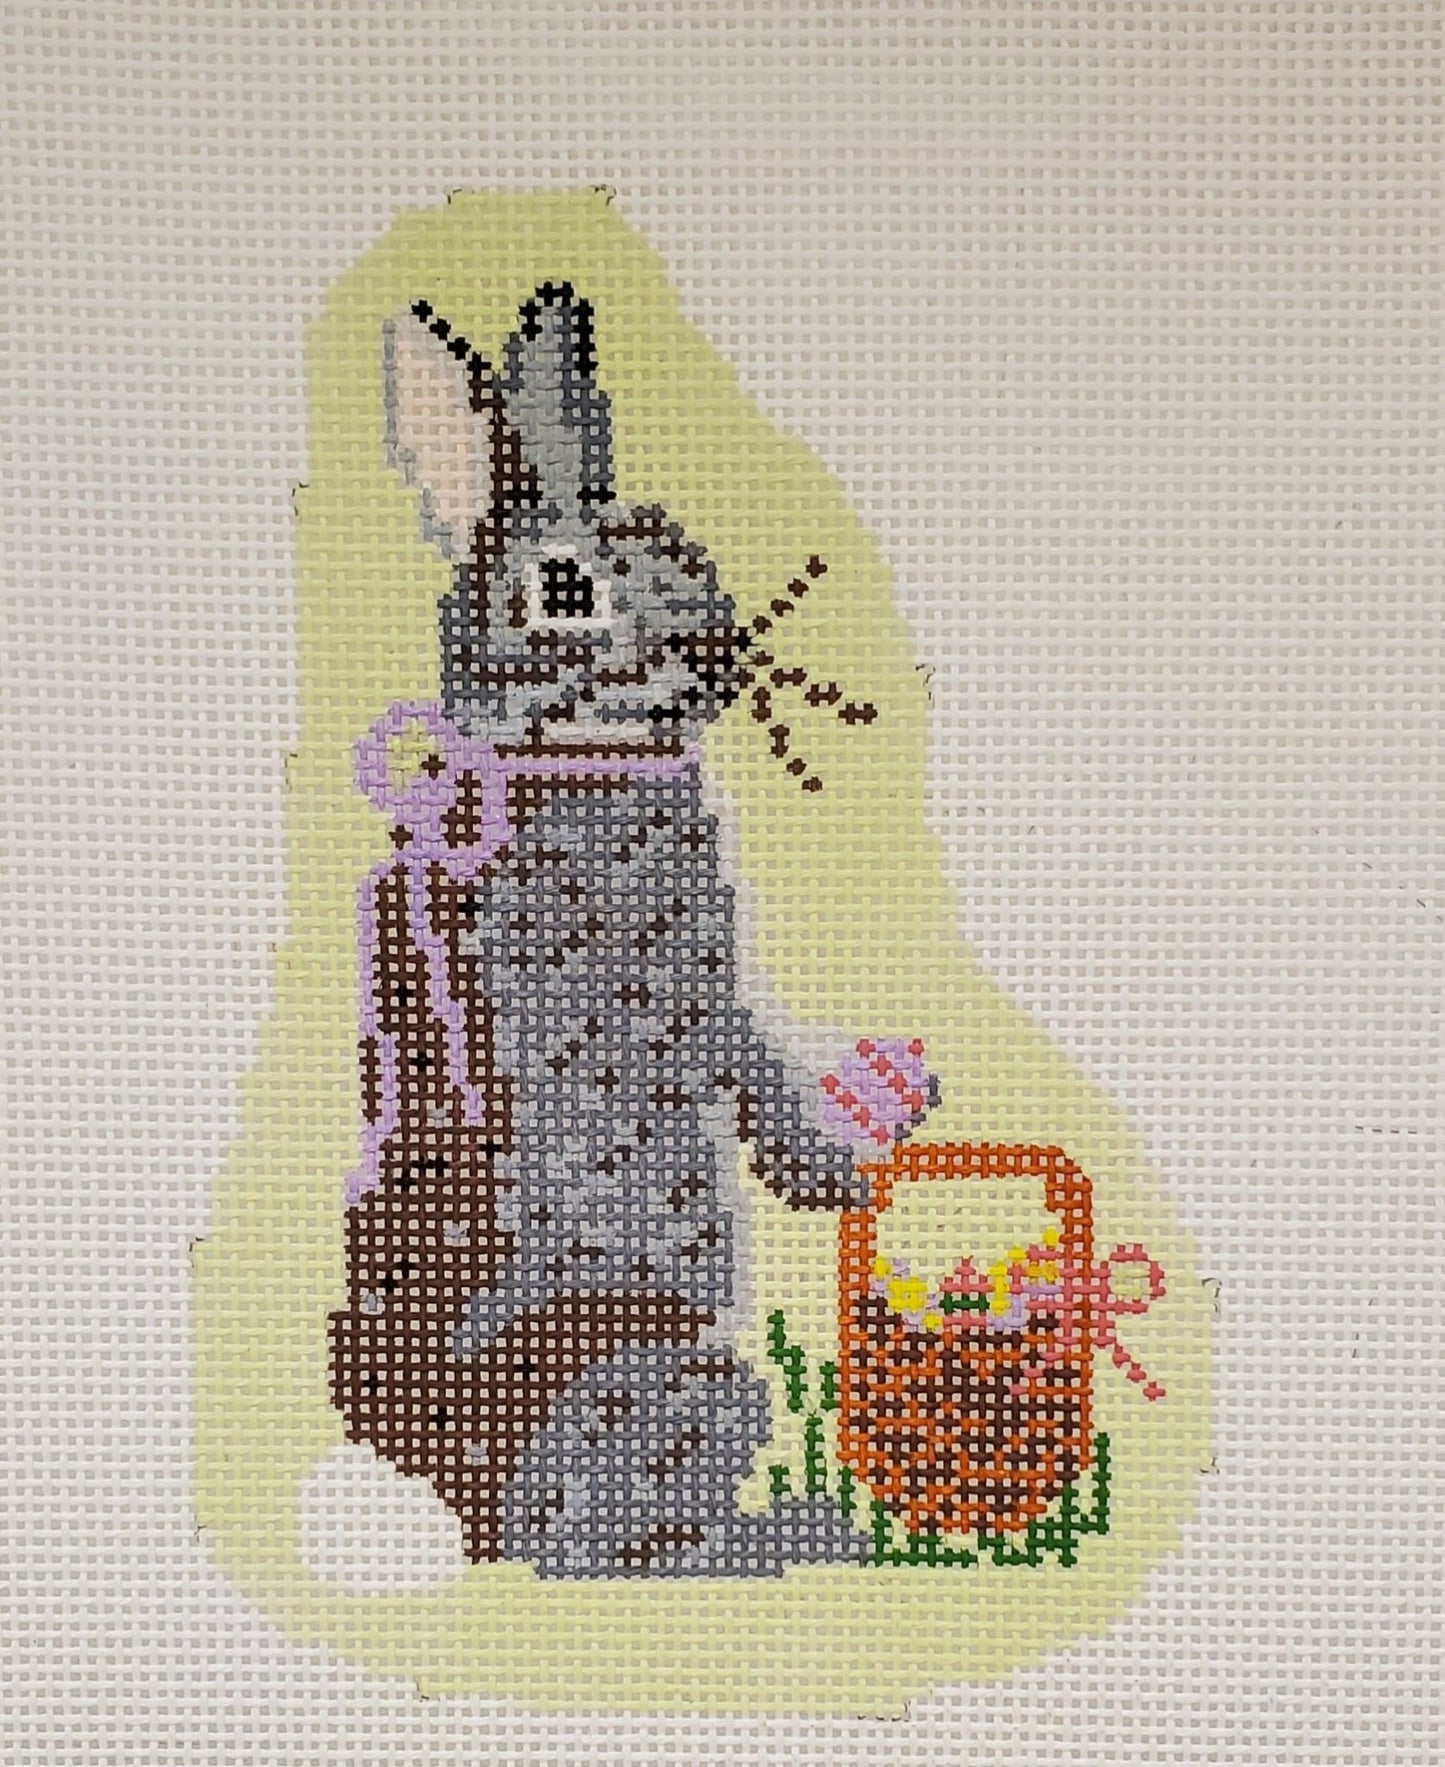 Easter Bunny at Work - The Flying Needles